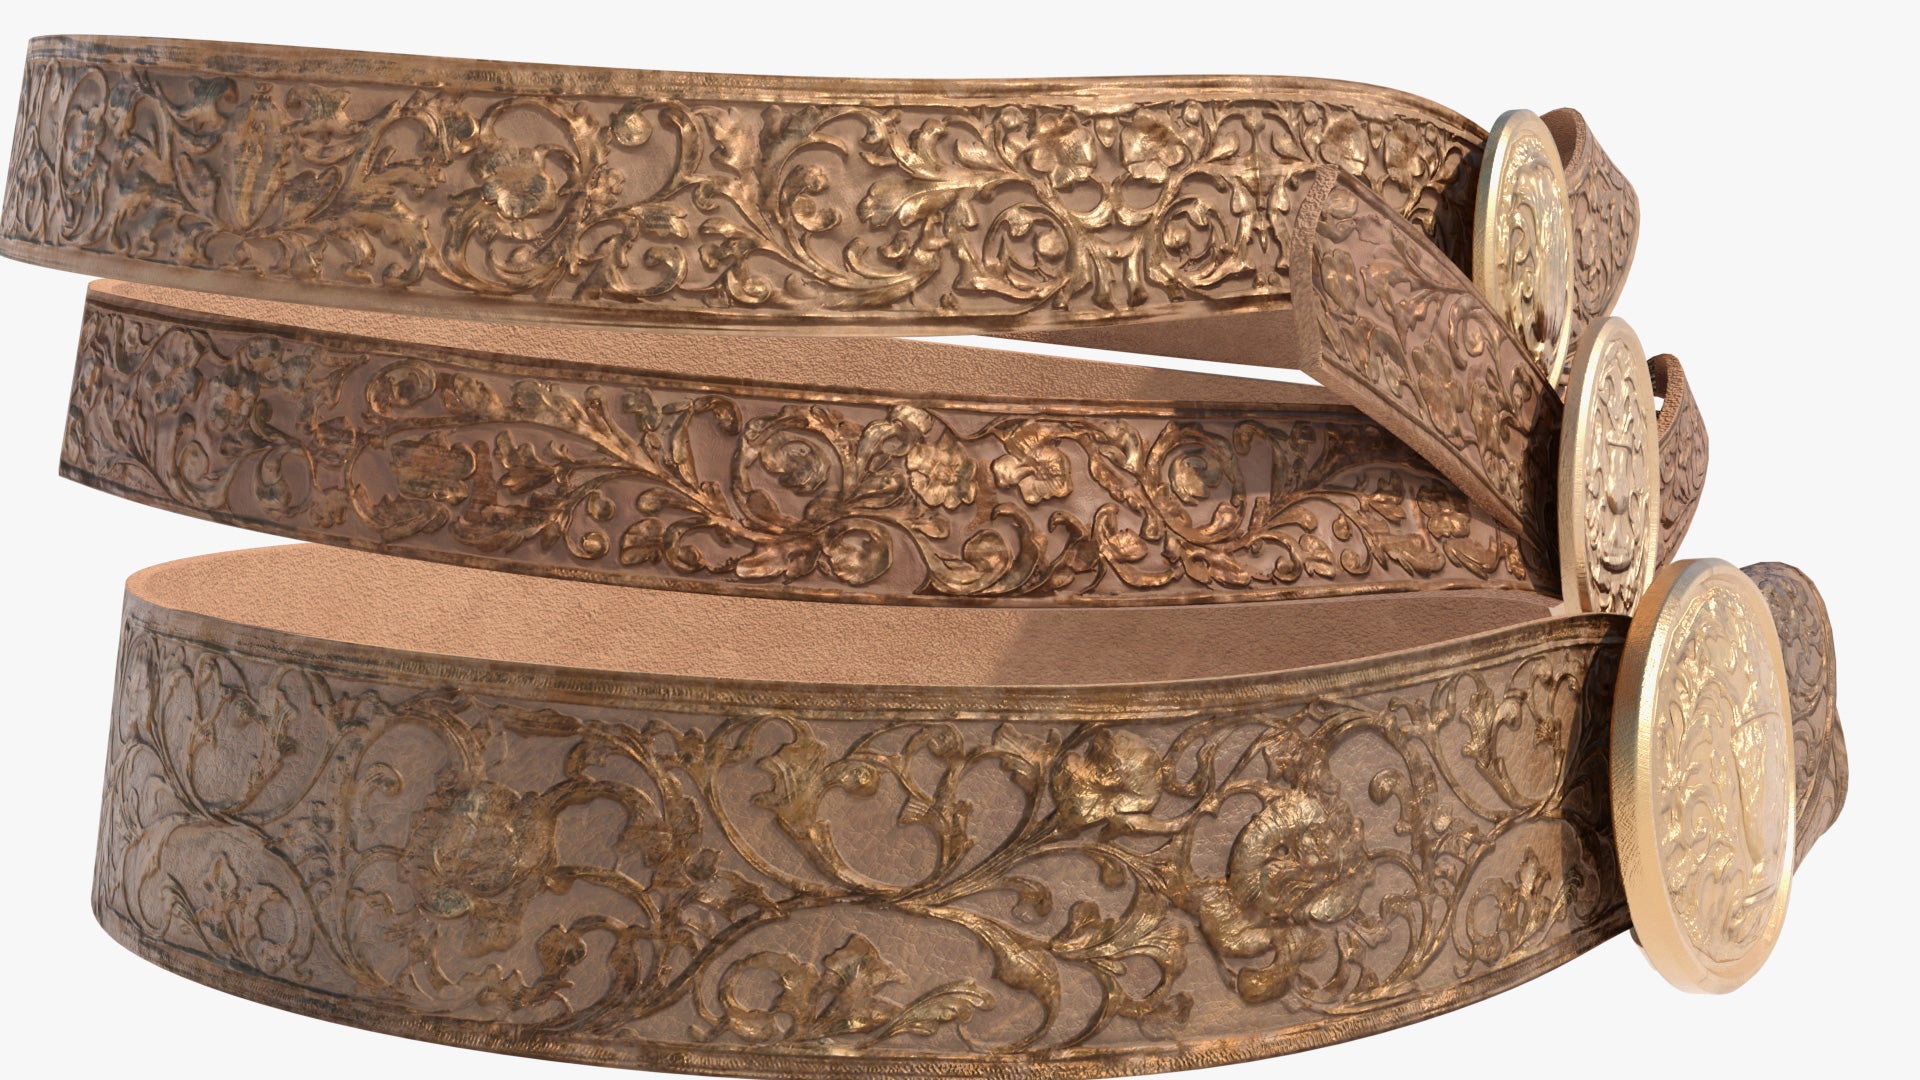 3D model of three belts in medieval fantasy style, inspired by ancient Rome, floral embossed details in the leather